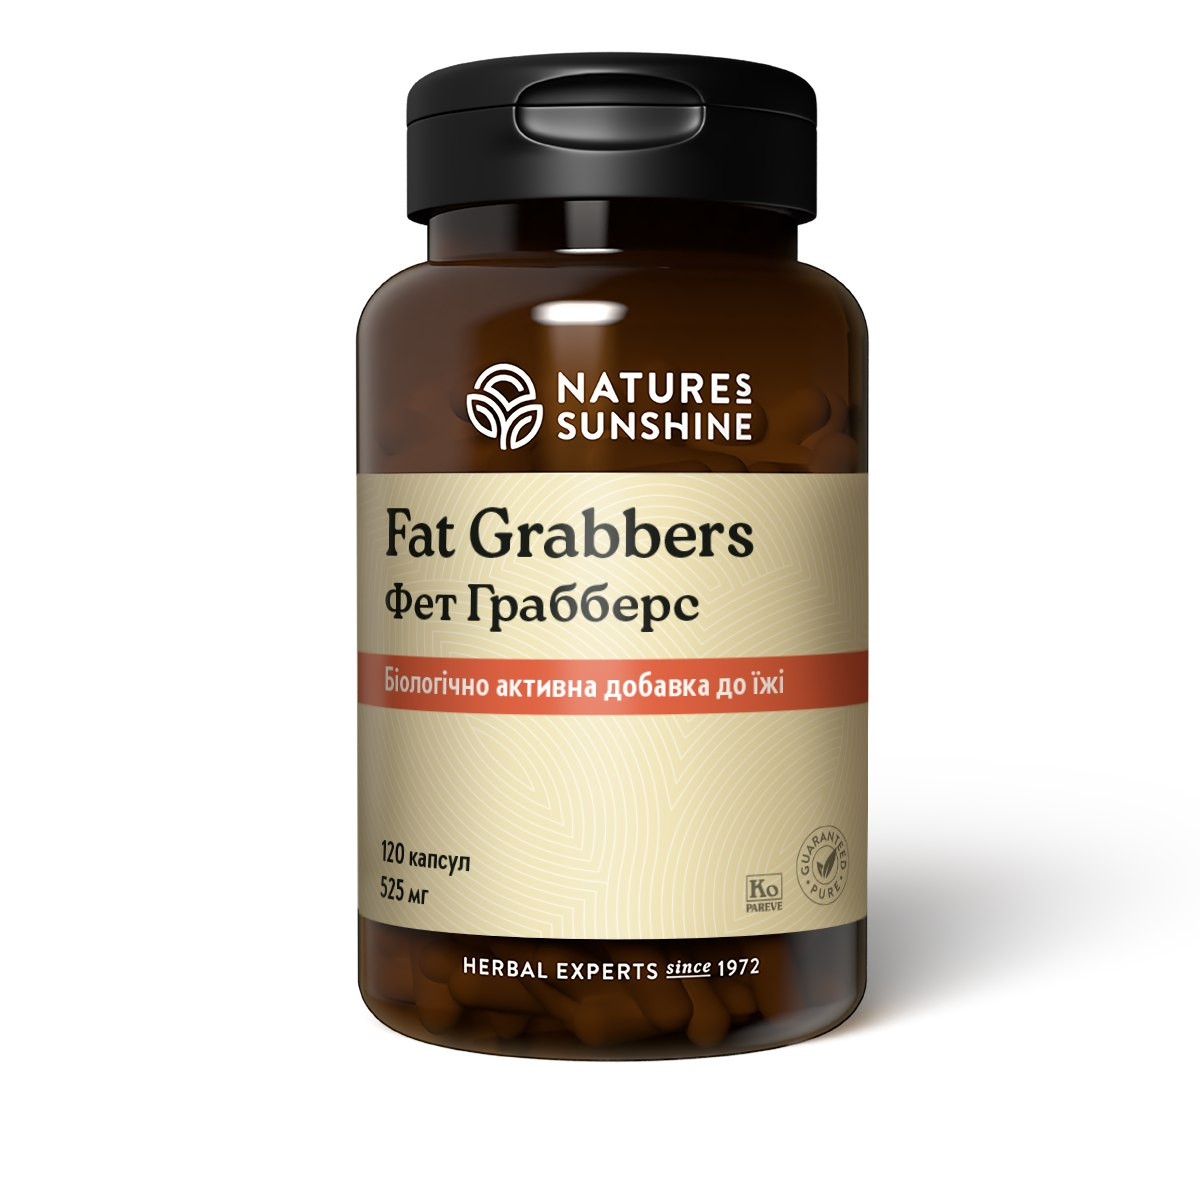 Fat Grabbers* - Фэт Грэбберз* - БАД Nature's Sunshine Products (NSP)